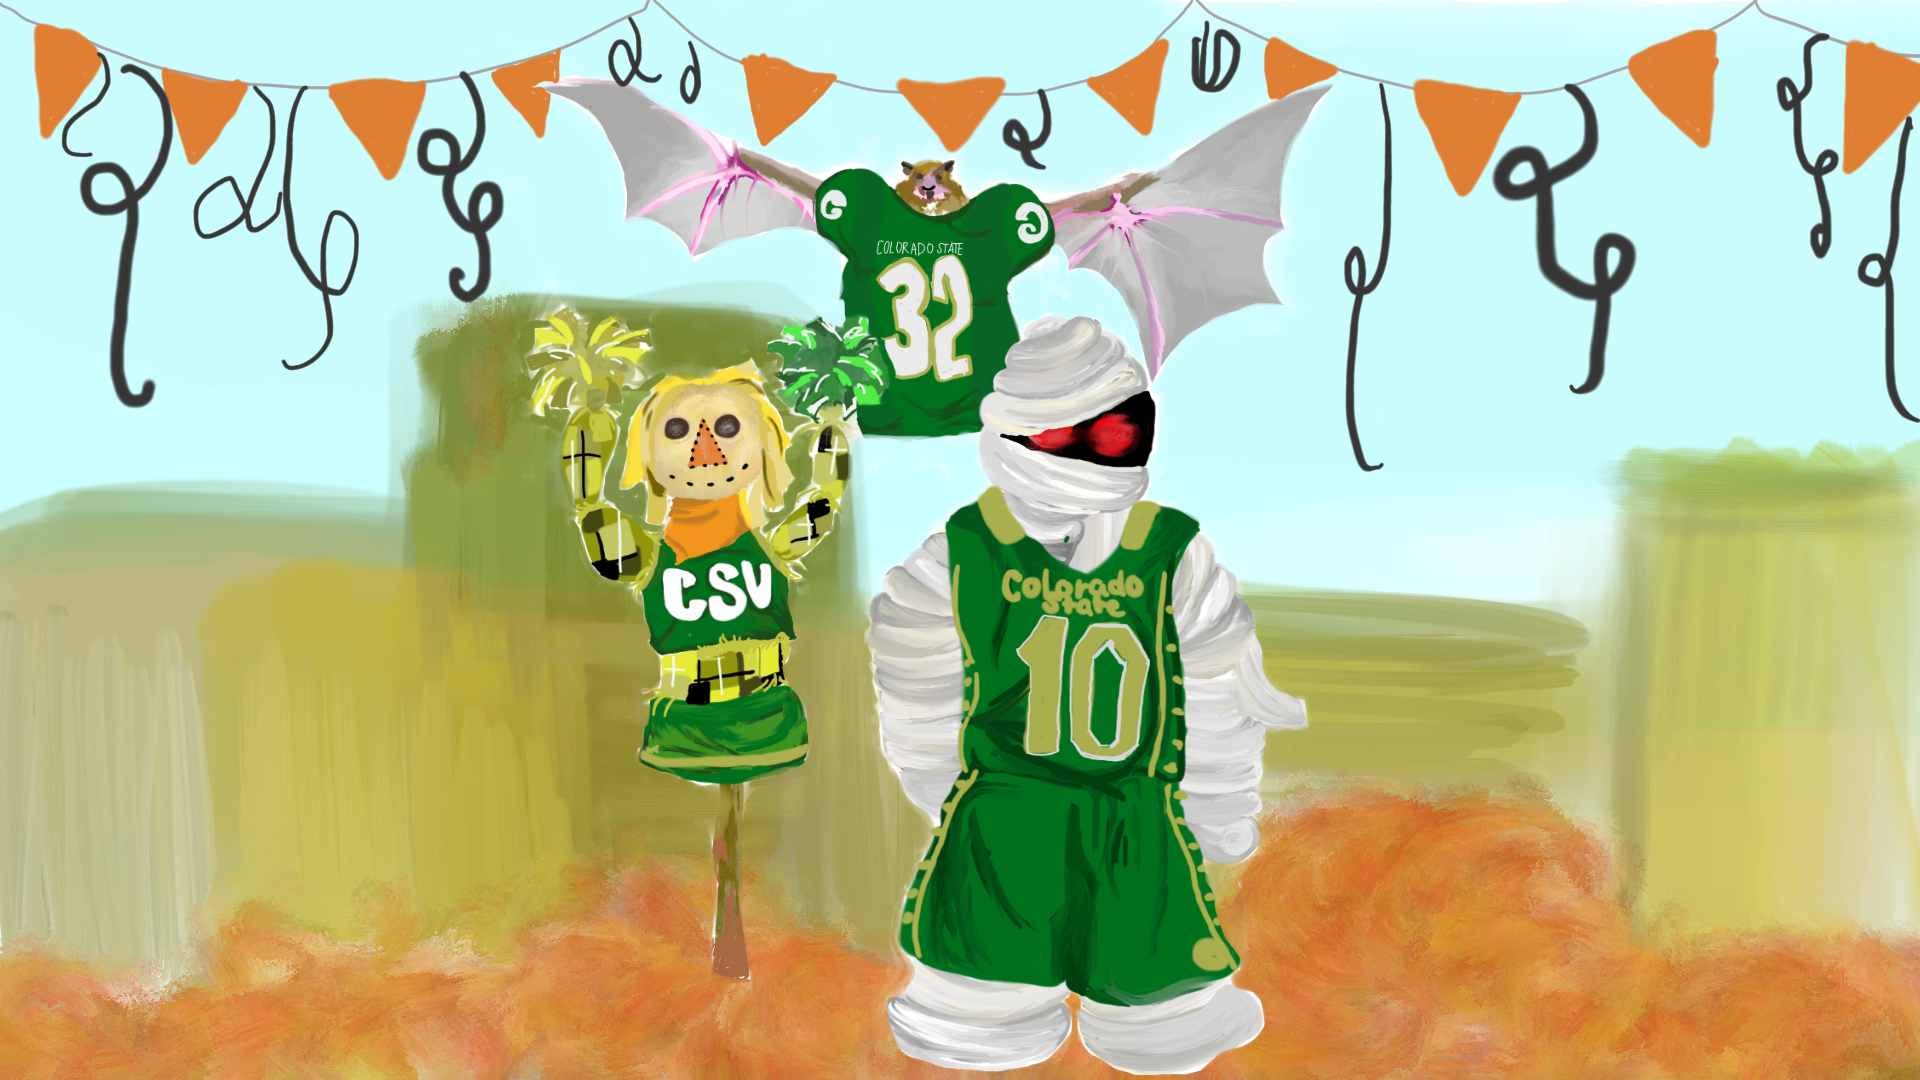 Illustration of several halloween figures dressed up in sports jerseys